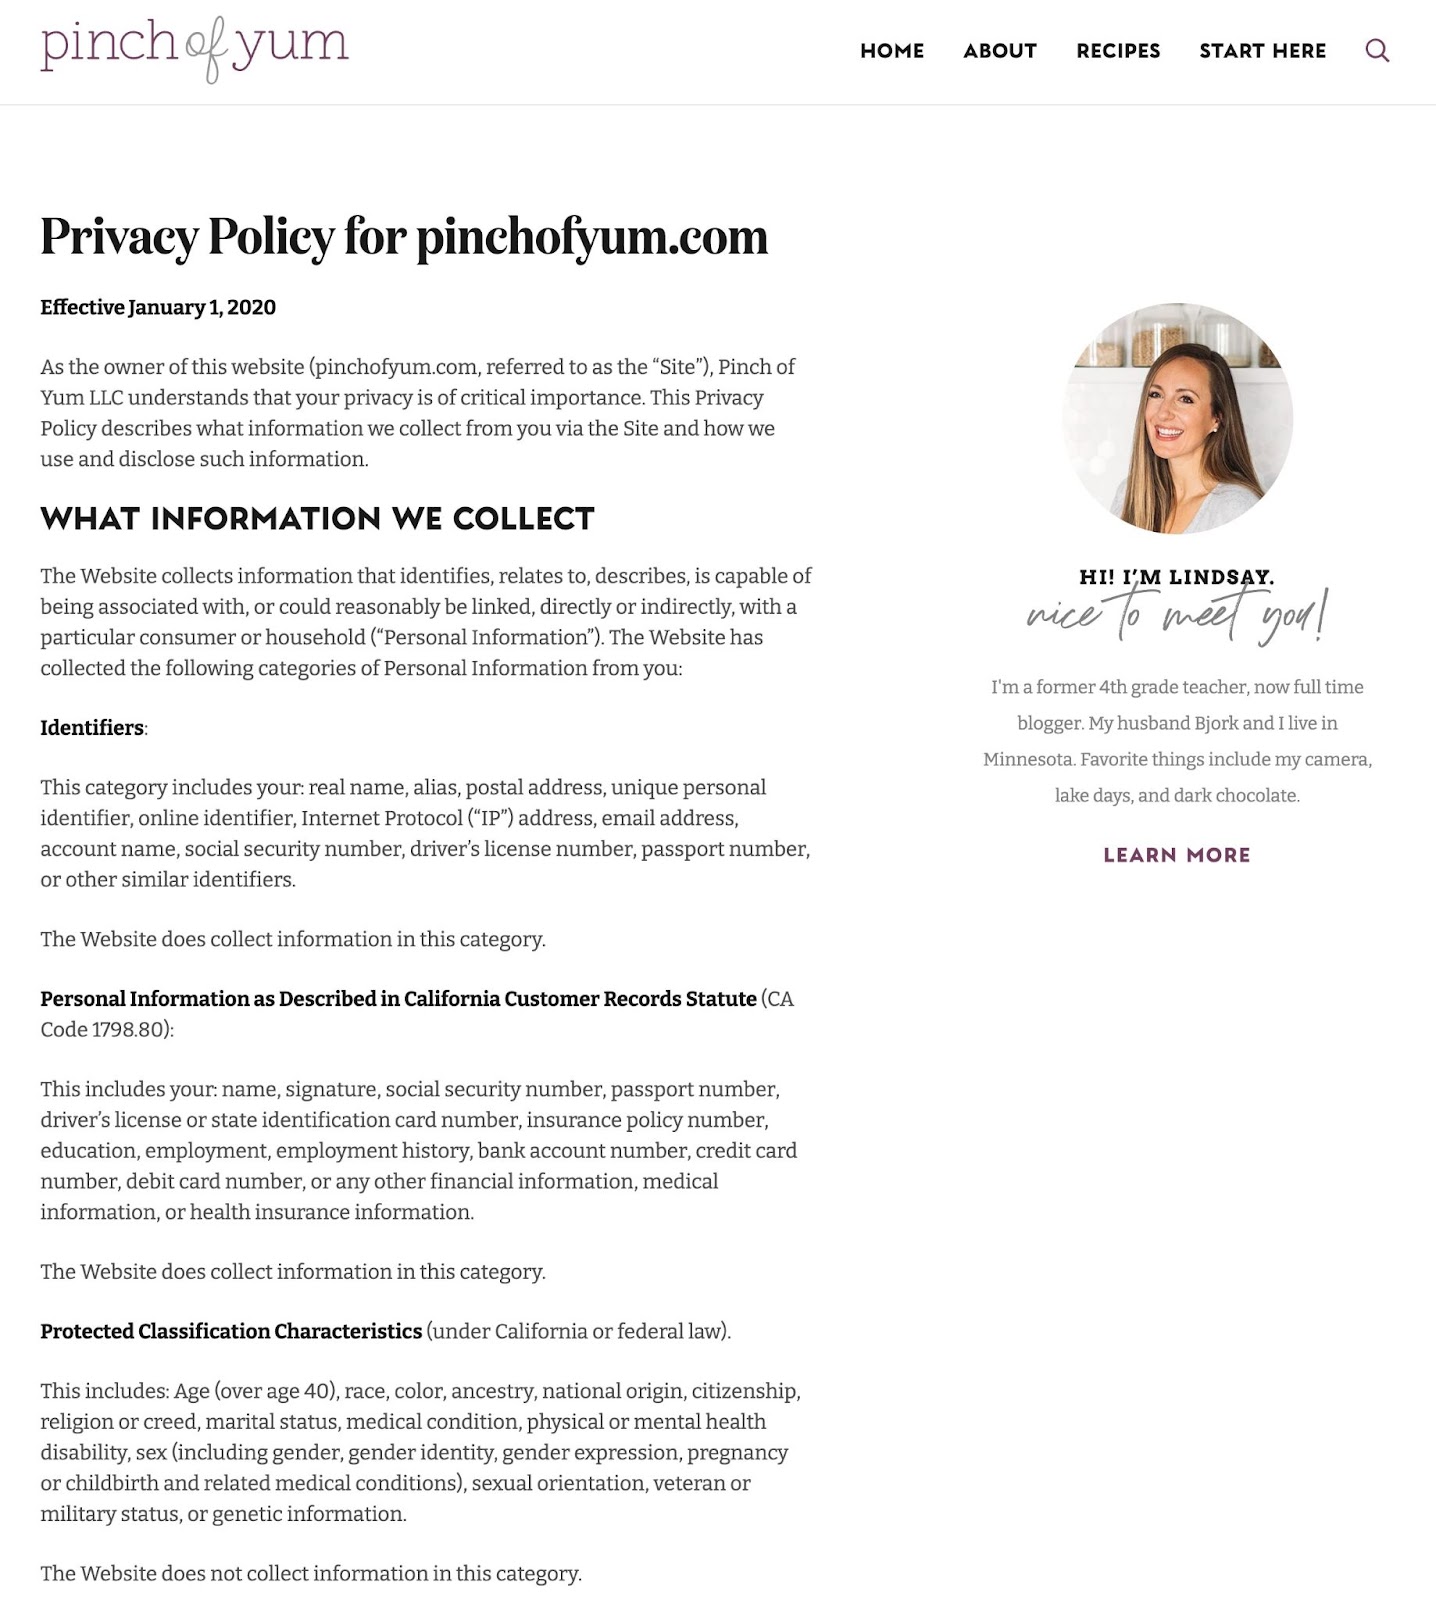 WordPress privacy policy, example from Pinch of Yum